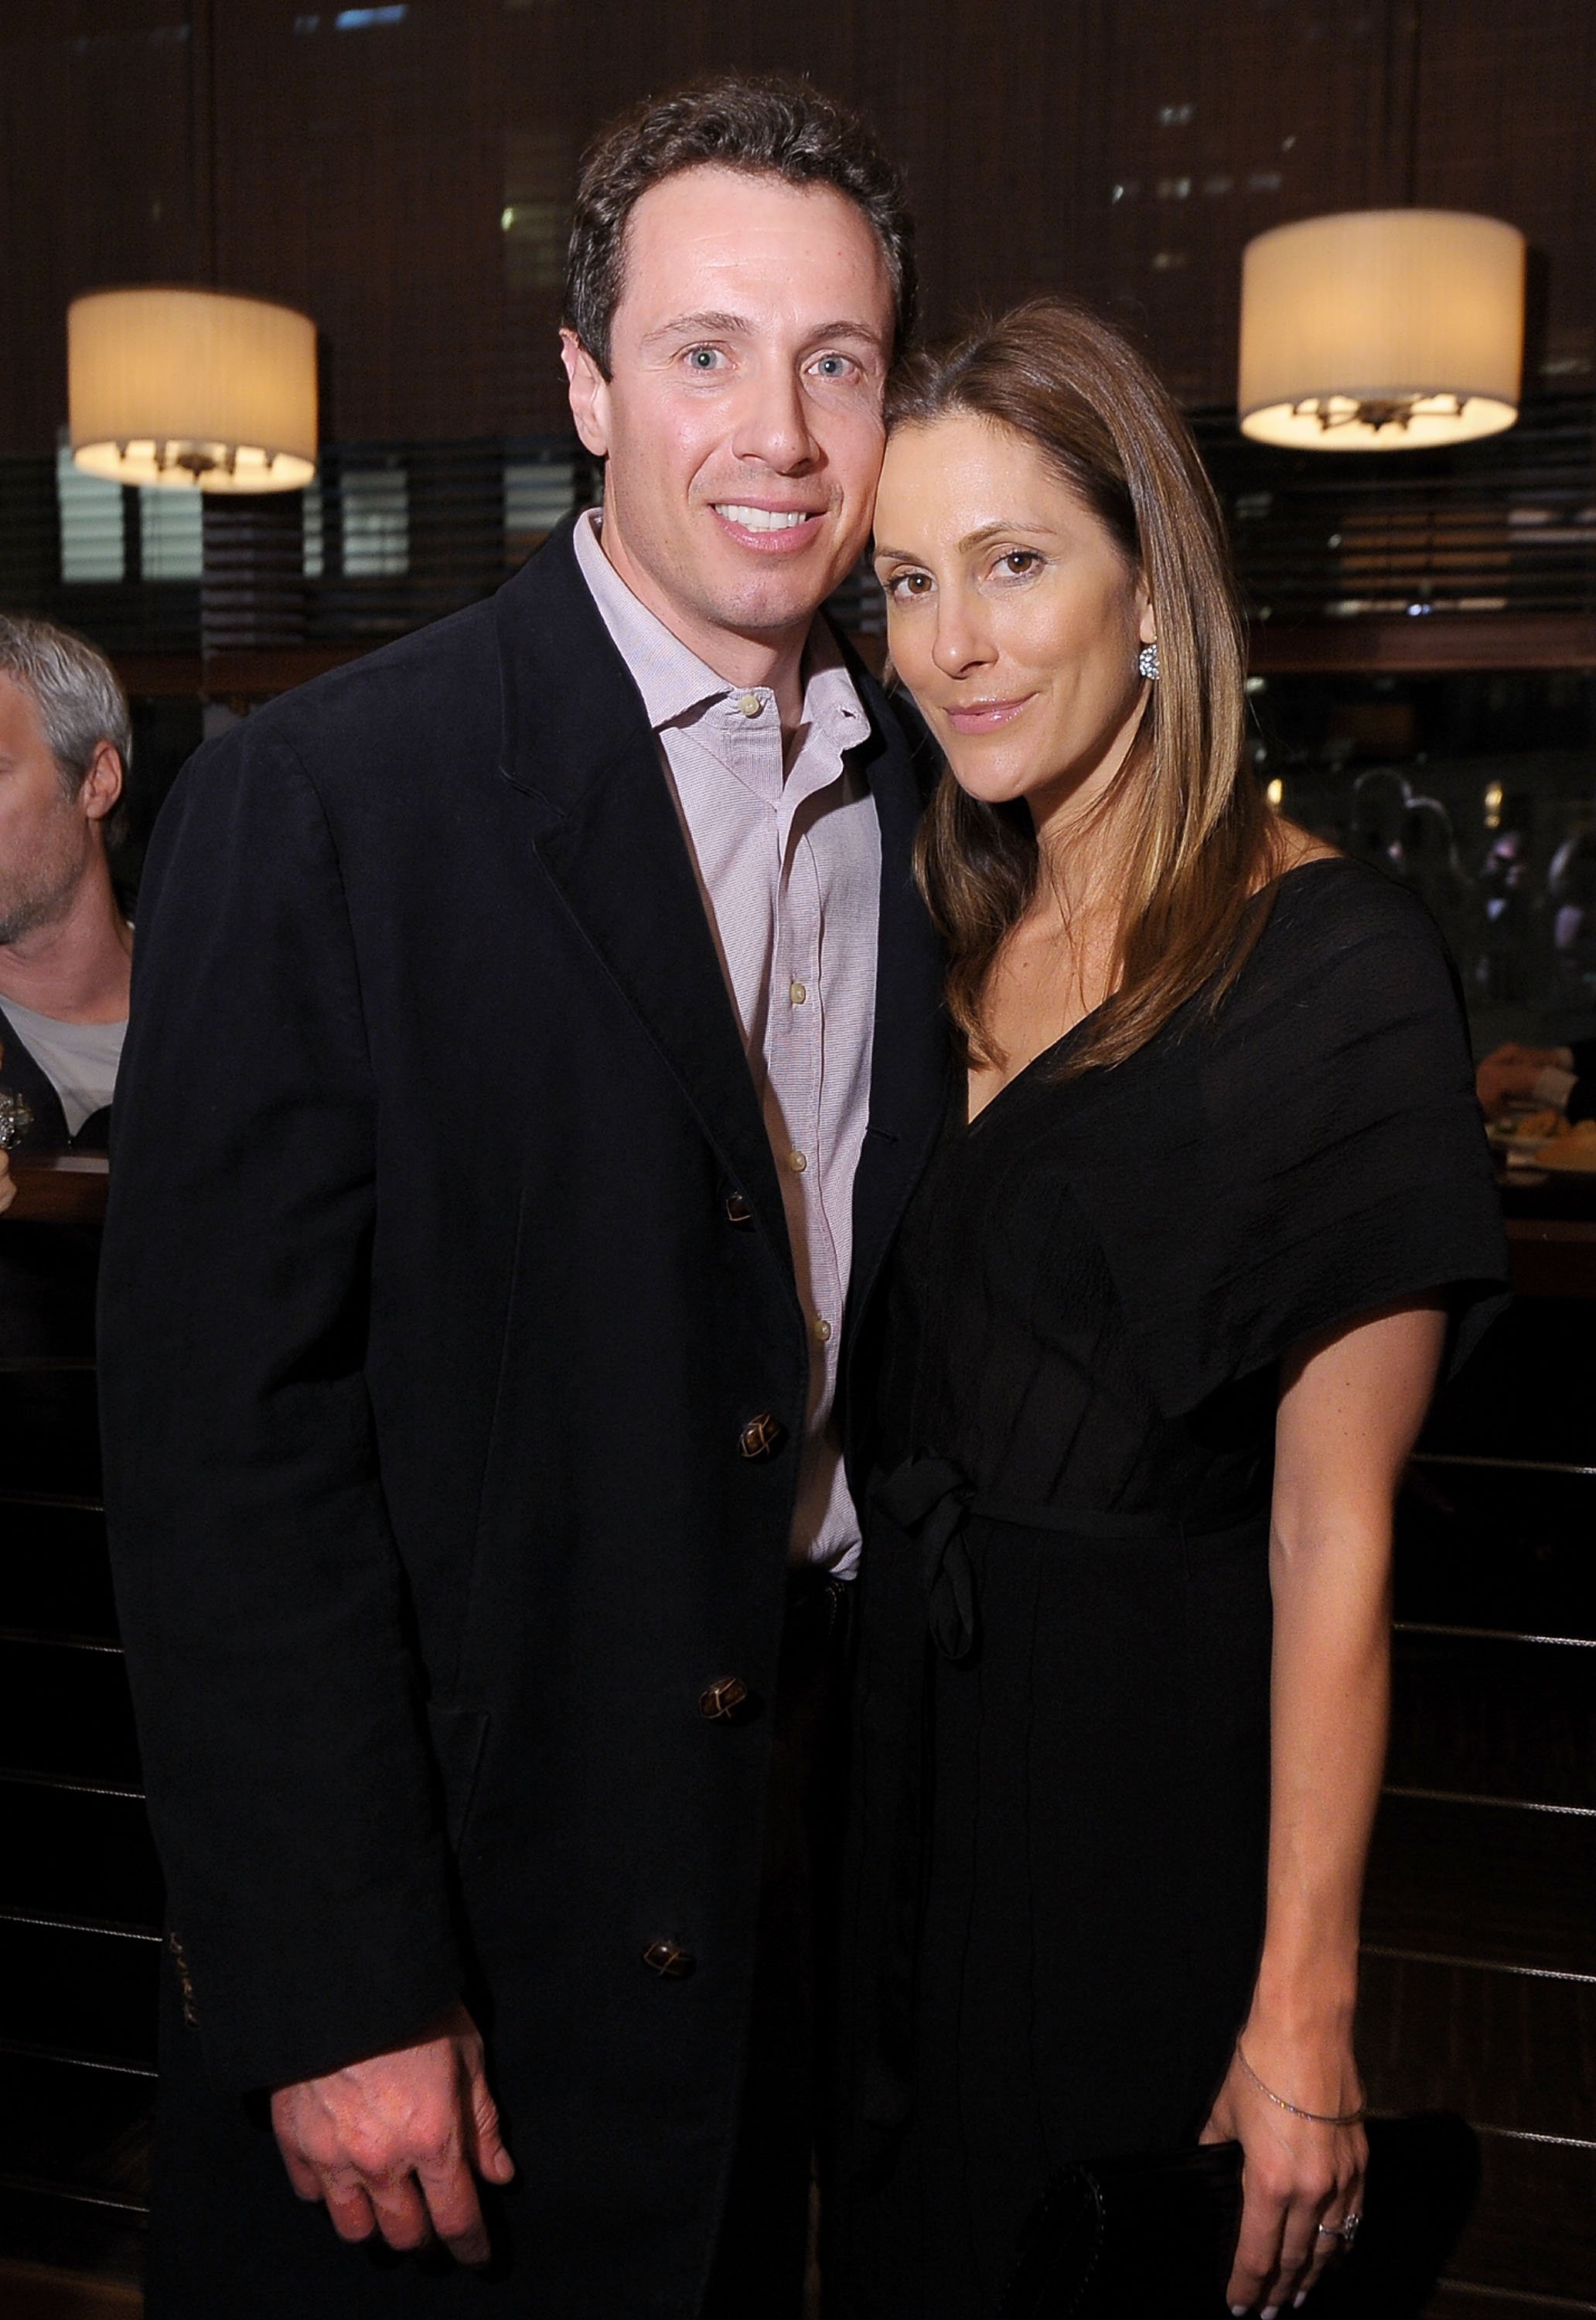  Chris Cuomo and Cristina Greeven Cuomo attend the Screening Of "His Way" on March 30, 2011, in New York City. | Source: Getty Images.